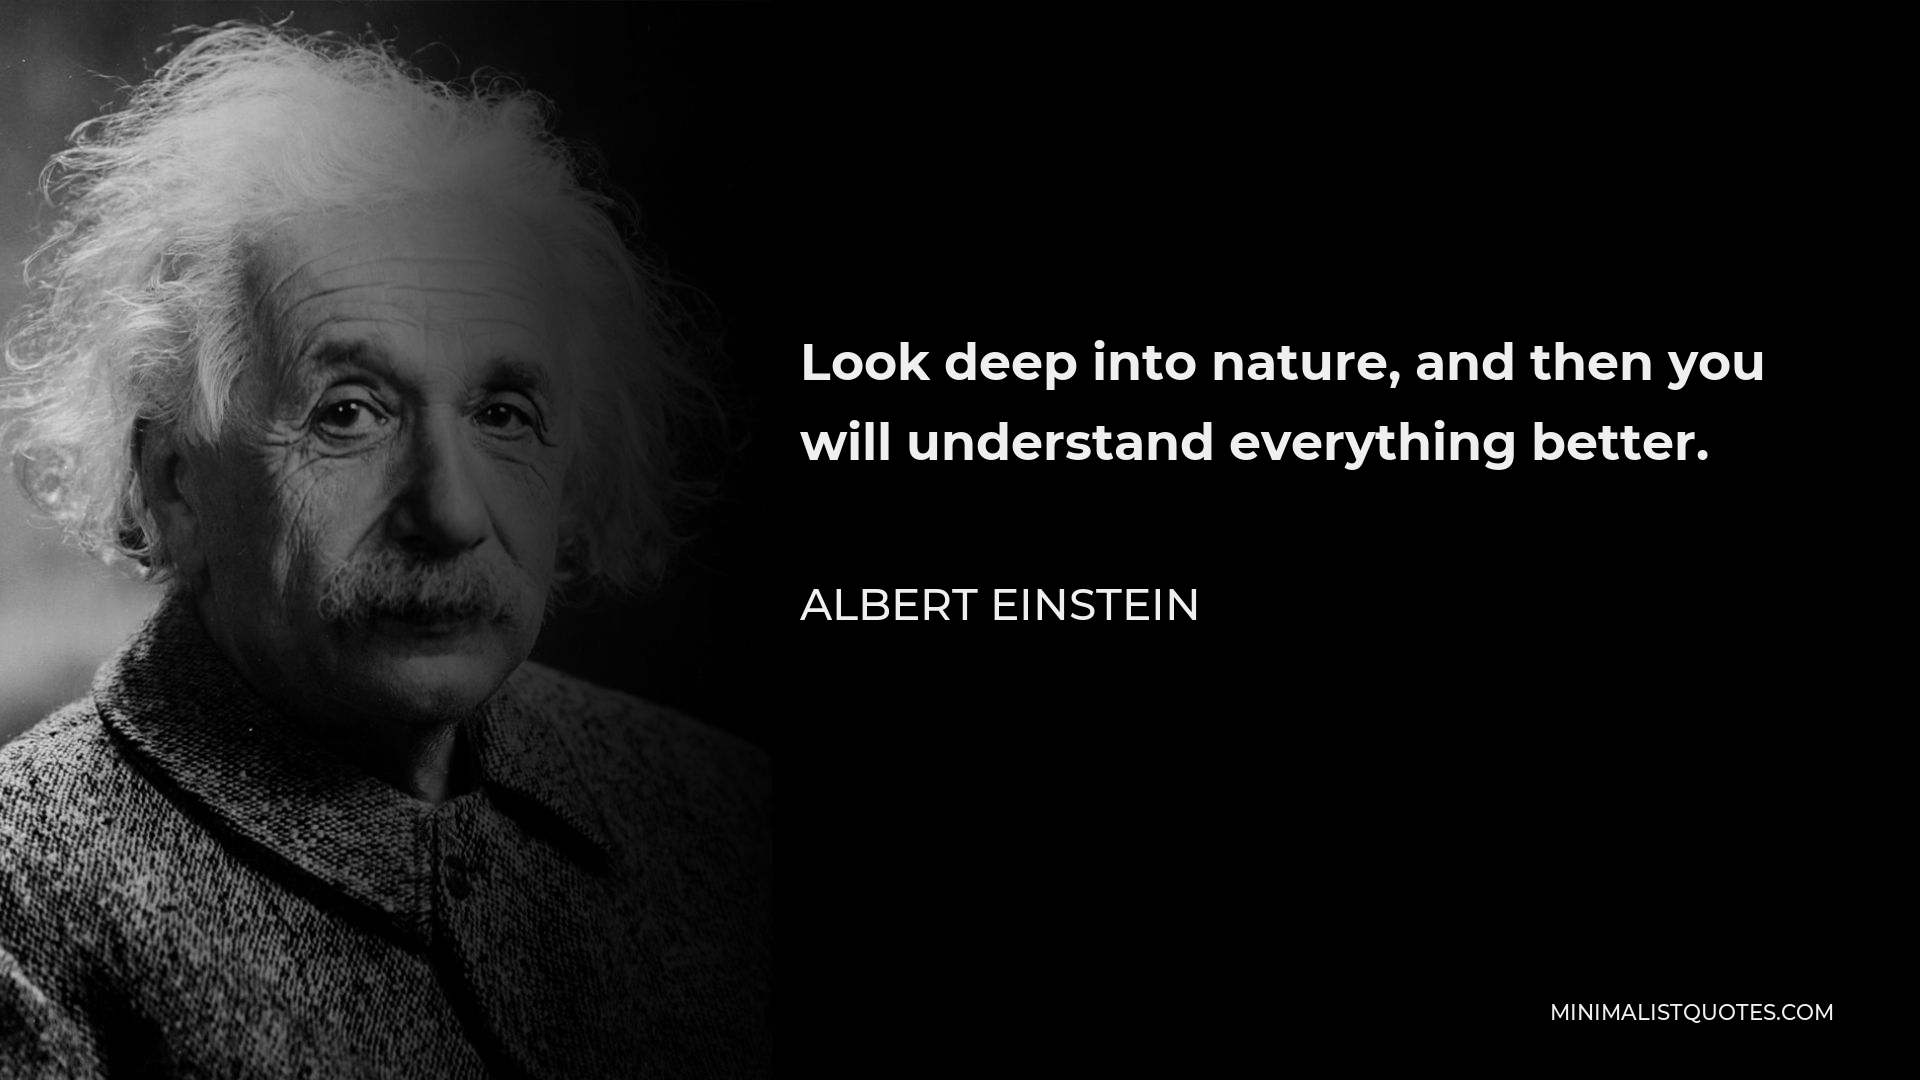 Albert Einstein Quote - Look deep into nature, and then you will understand everything better.